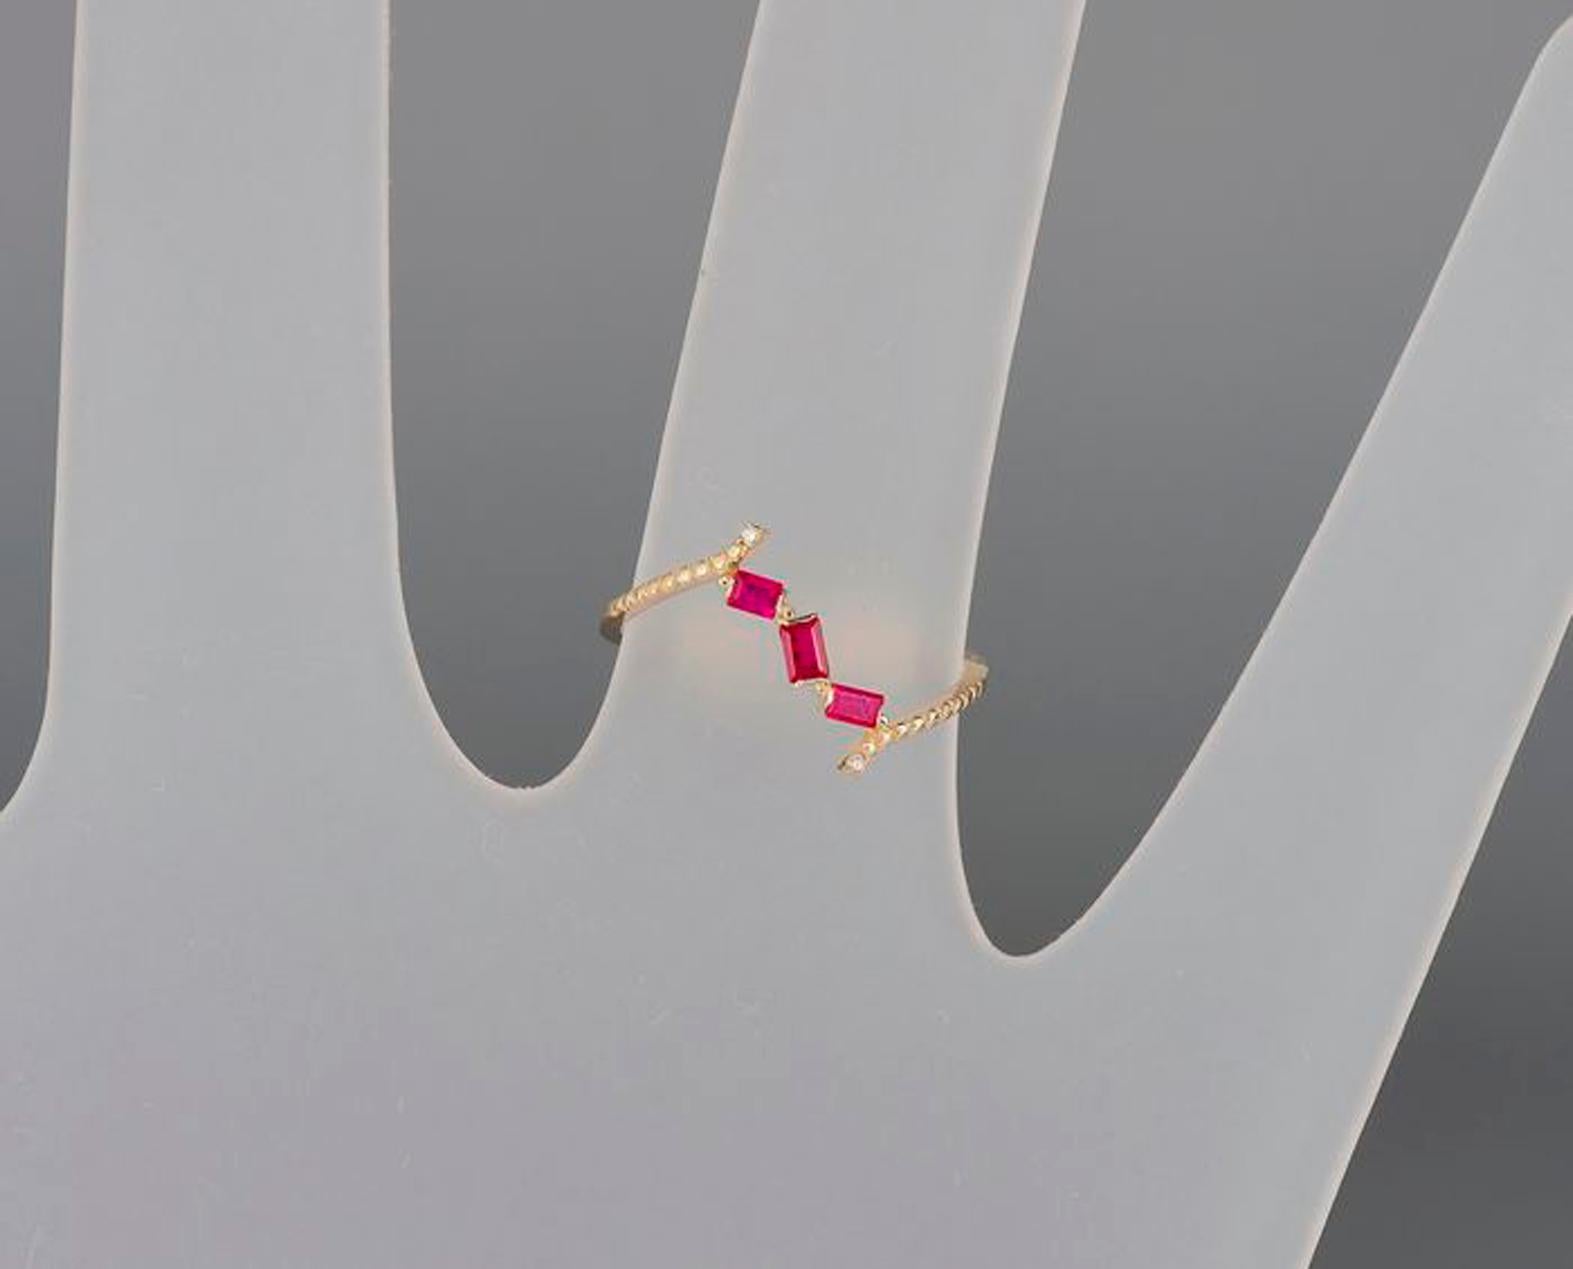 Modern 14k Gold Ring with Rubies and Diamonds, Baguette Ruby Ring